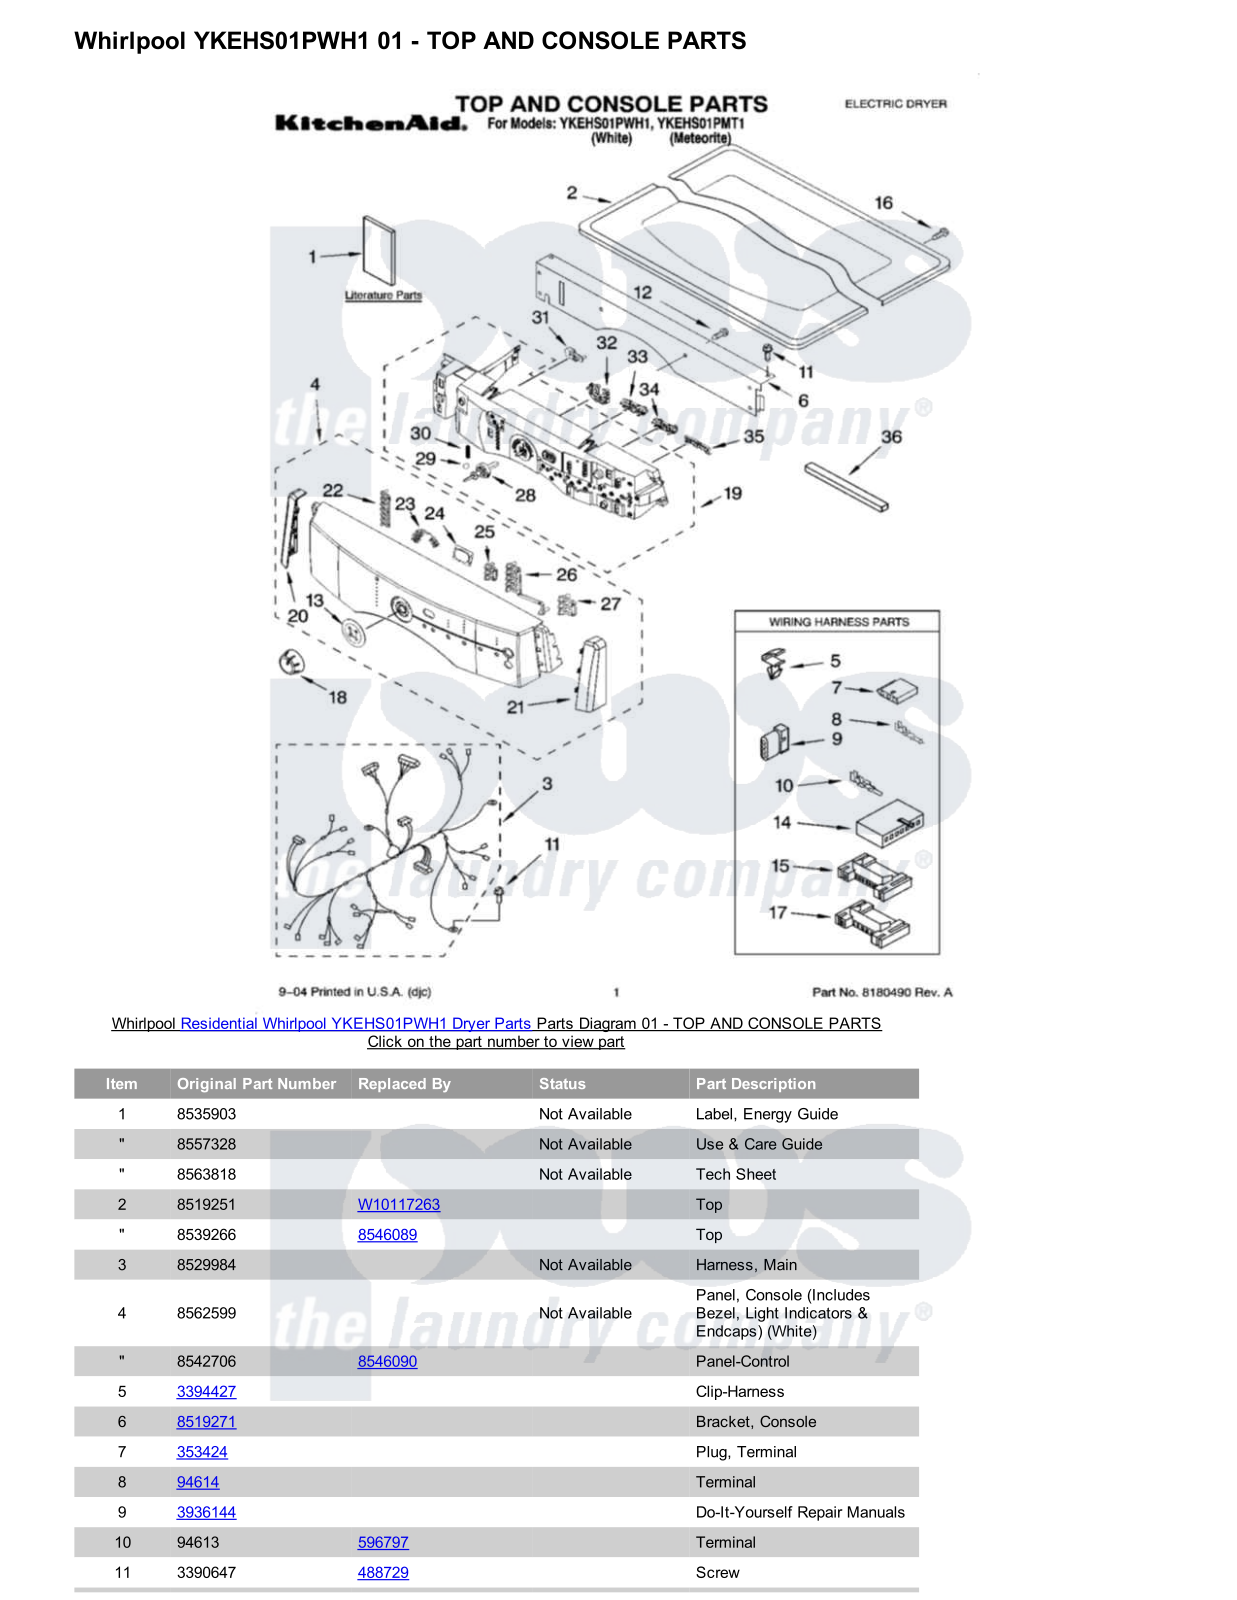 Whirlpool YKEHS01PWH1 Parts Diagram